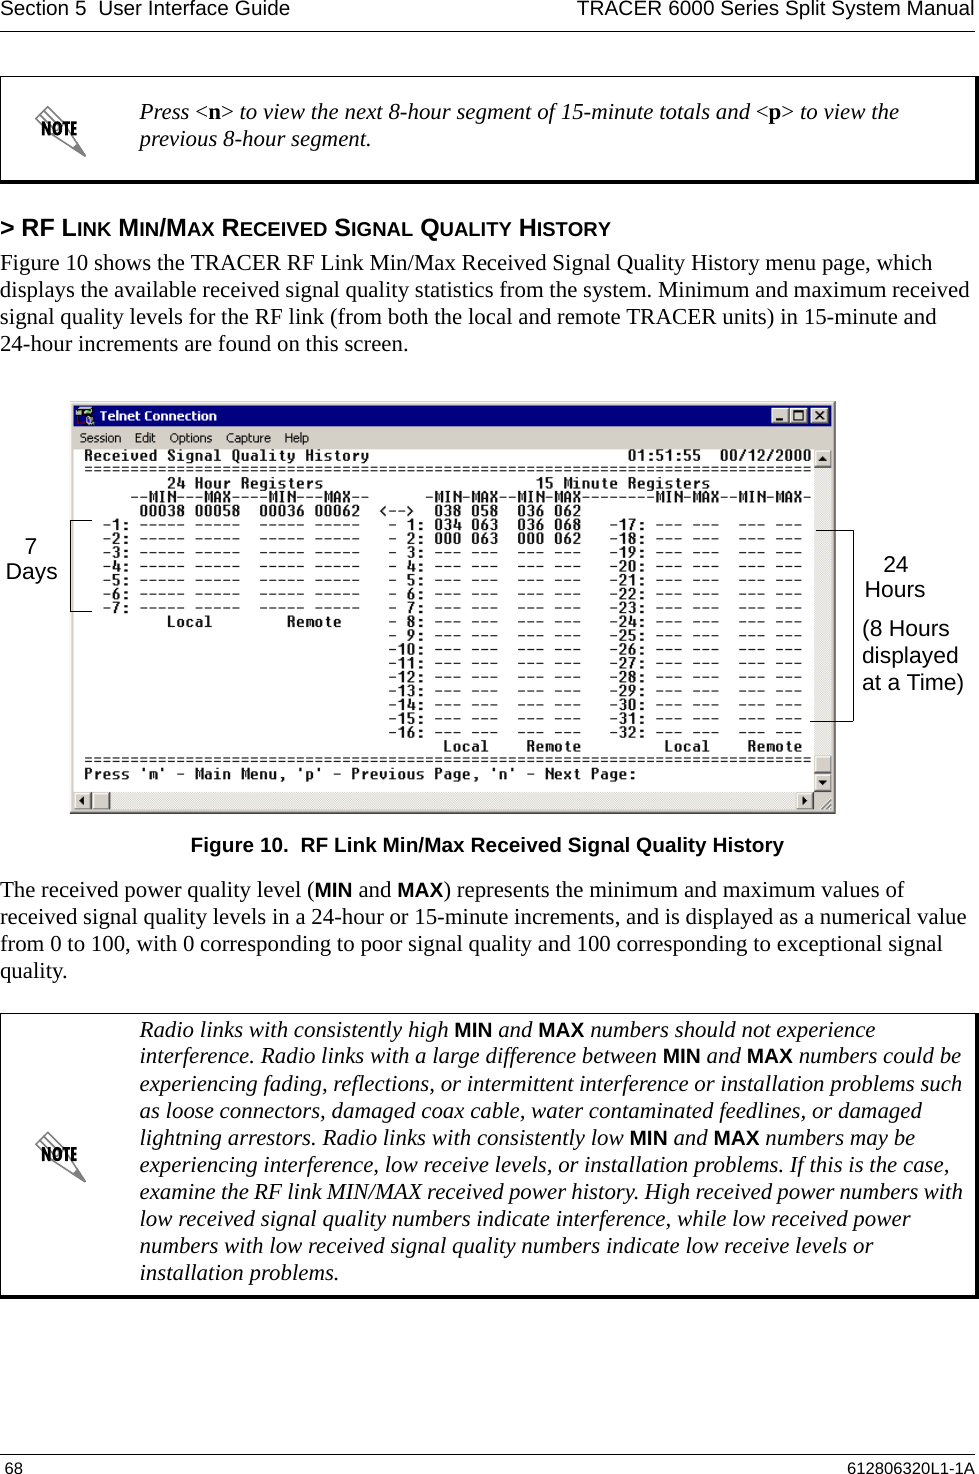 Section 5  User Interface Guide TRACER 6000 Series Split System Manual 68 612806320L1-1A&gt; RF LINK MIN/MAX RECEIVED SIGNAL QUALITY HISTORYFigure 10 shows the TRACER RF Link Min/Max Received Signal Quality History menu page, which displays the available received signal quality statistics from the system. Minimum and maximum received signal quality levels for the RF link (from both the local and remote TRACER units) in 15-minute and 24-hour increments are found on this screen. Figure 10.  RF Link Min/Max Received Signal Quality HistoryThe received power quality level (MIN and MAX) represents the minimum and maximum values of received signal quality levels in a 24-hour or 15-minute increments, and is displayed as a numerical value from 0 to 100, with 0 corresponding to poor signal quality and 100 corresponding to exceptional signal quality.Press &lt;n&gt; to view the next 8-hour segment of 15-minute totals and &lt;p&gt; to view the previous 8-hour segment.Radio links with consistently high MIN and MAX numbers should not experience interference. Radio links with a large difference between MIN and MAX numbers could be experiencing fading, reflections, or intermittent interference or installation problems such as loose connectors, damaged coax cable, water contaminated feedlines, or damaged lightning arrestors. Radio links with consistently low MIN and MAX numbers may be experiencing interference, low receive levels, or installation problems. If this is the case, examine the RF link MIN/MAX received power history. High received power numbers with low received signal quality numbers indicate interference, while low received power numbers with low received signal quality numbers indicate low receive levels or installation problems.7Days 24Hours(8 Hours displayed at a Time)